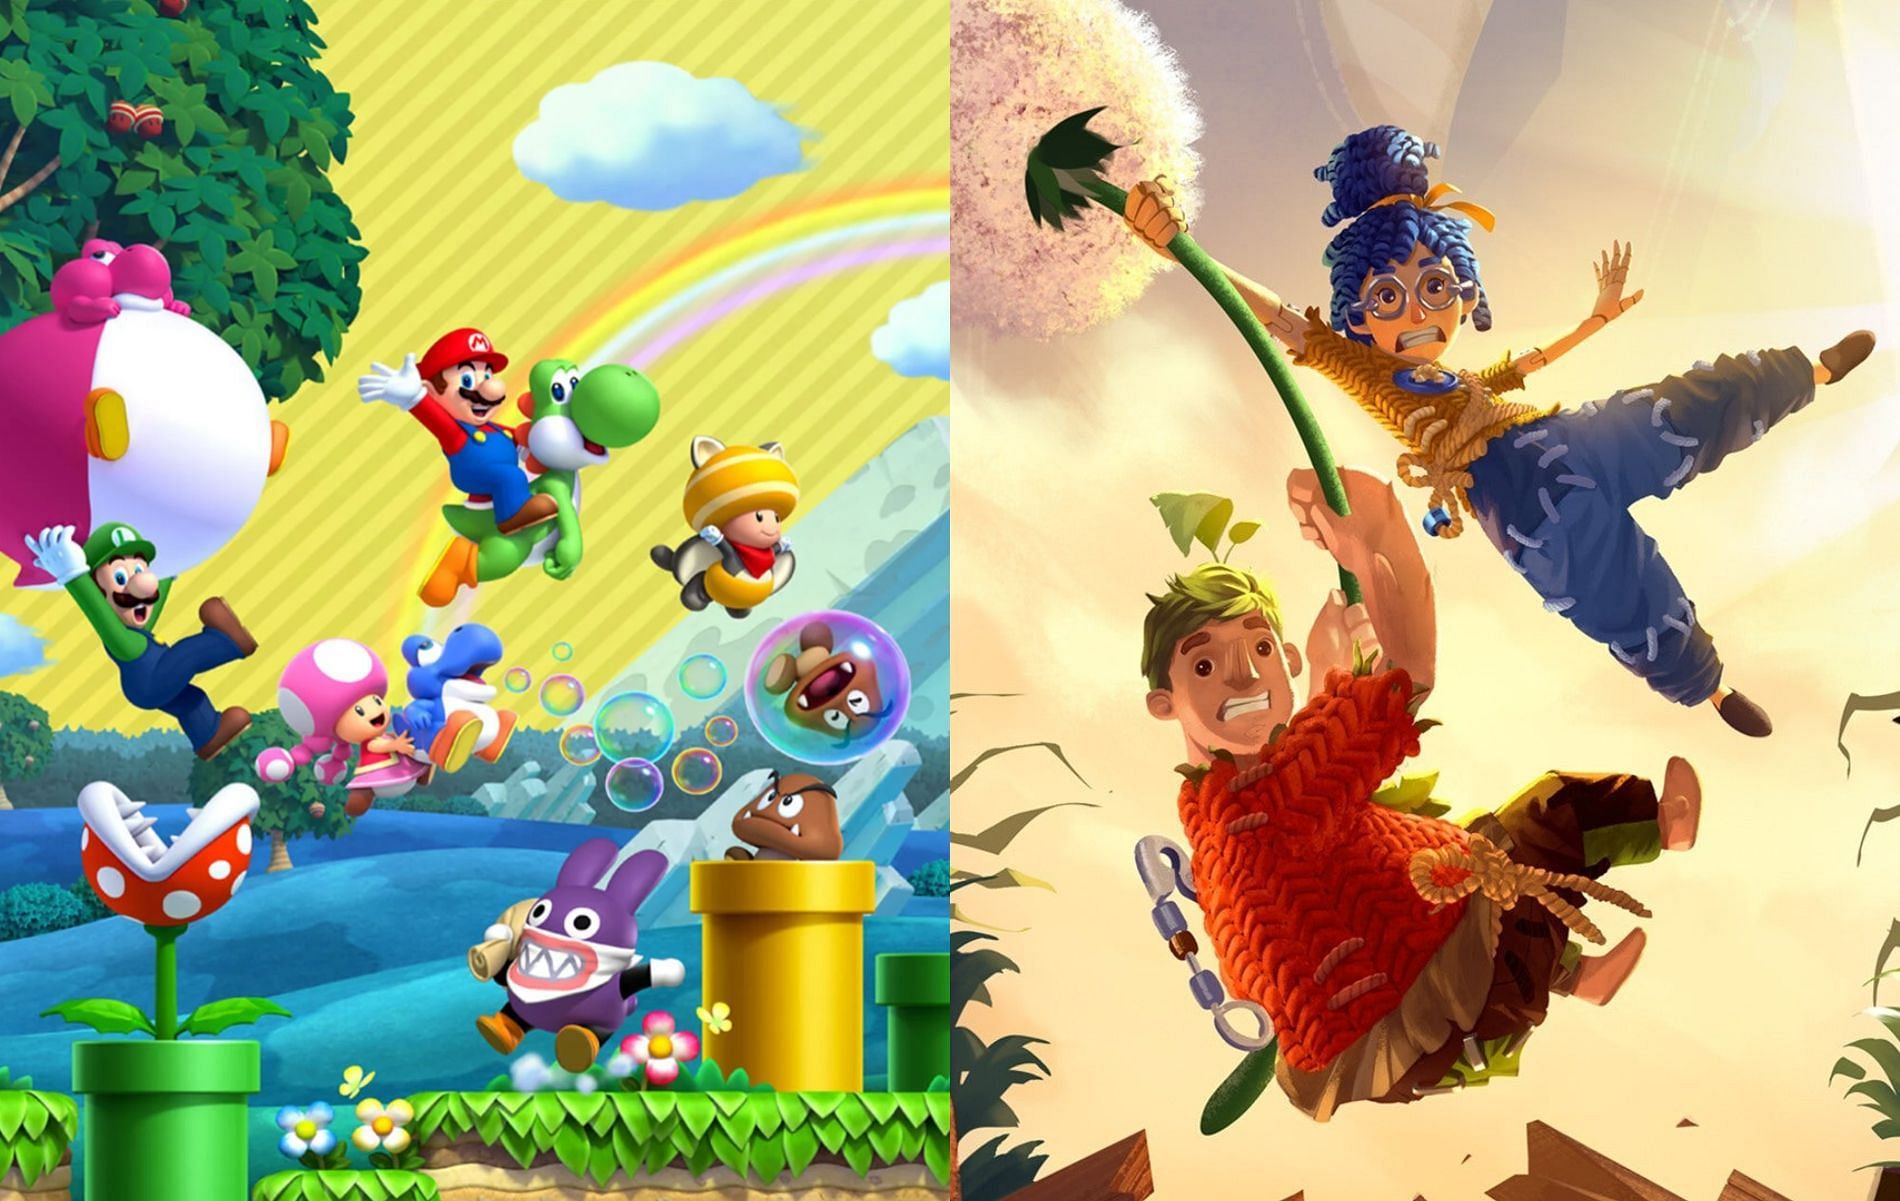 If rumors are to be believed, then the future has some exciting stuff in store for Switch fans (Images via Nintndo/EA)